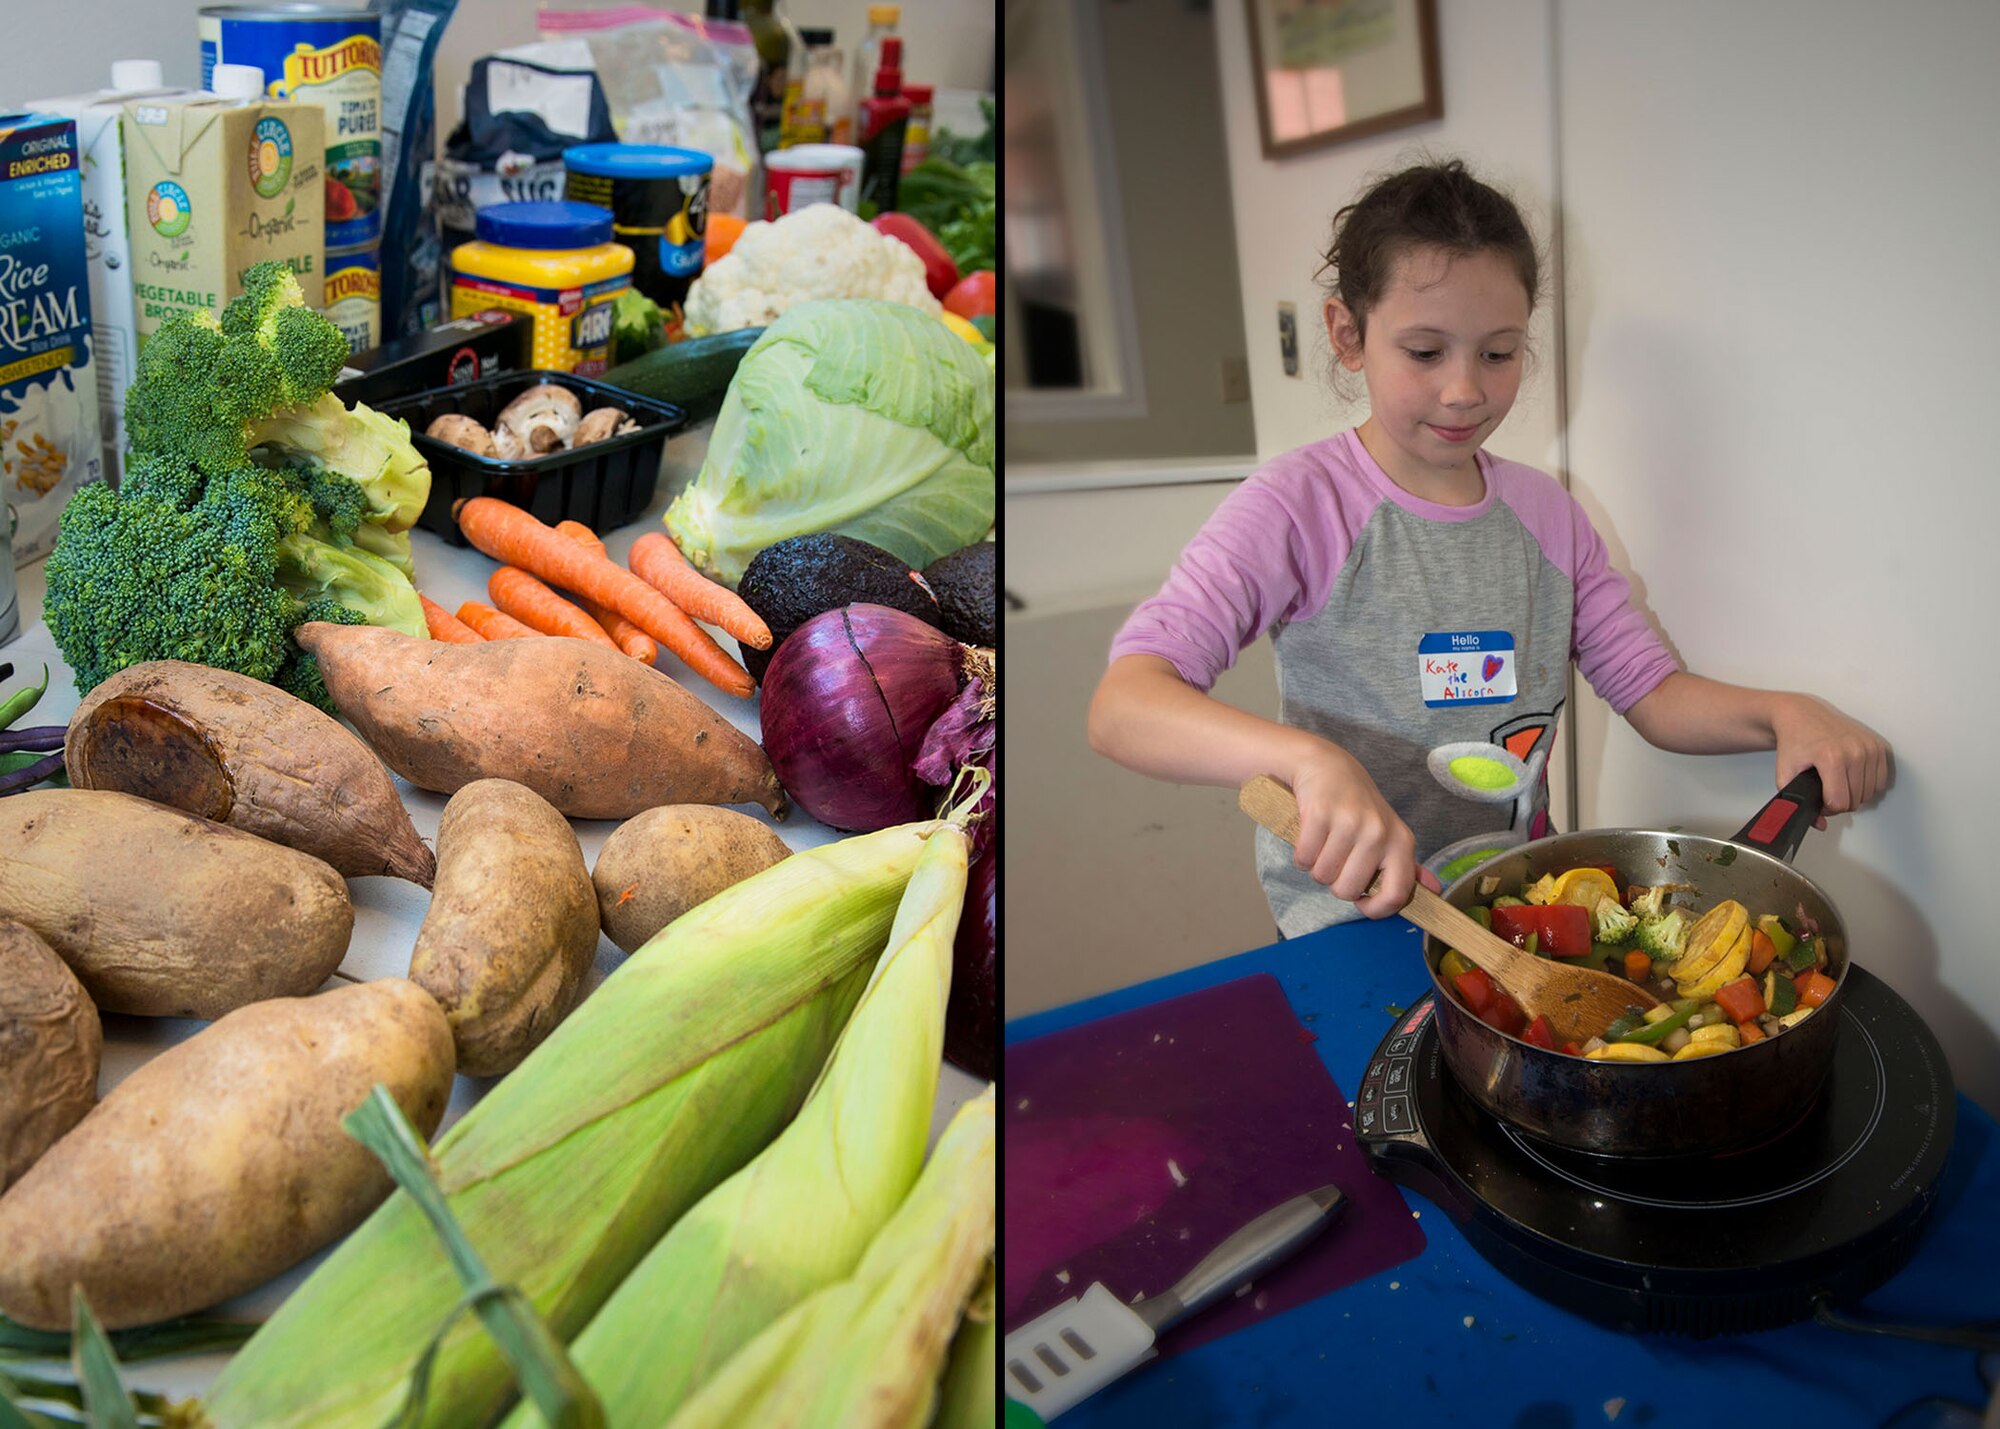 Pictured (left), vegetables used during the Jr. Chef Boot Camp cooking competition. Pictured (right) Jr. Chef Kate prepares vegetables. The Nourish My Soul slogan is “Planting Seeds and Stirring up Change One Community at a Time”. Jr. Chef Boot Camp supports the community by using locally-grown produce and through community outreach projects.